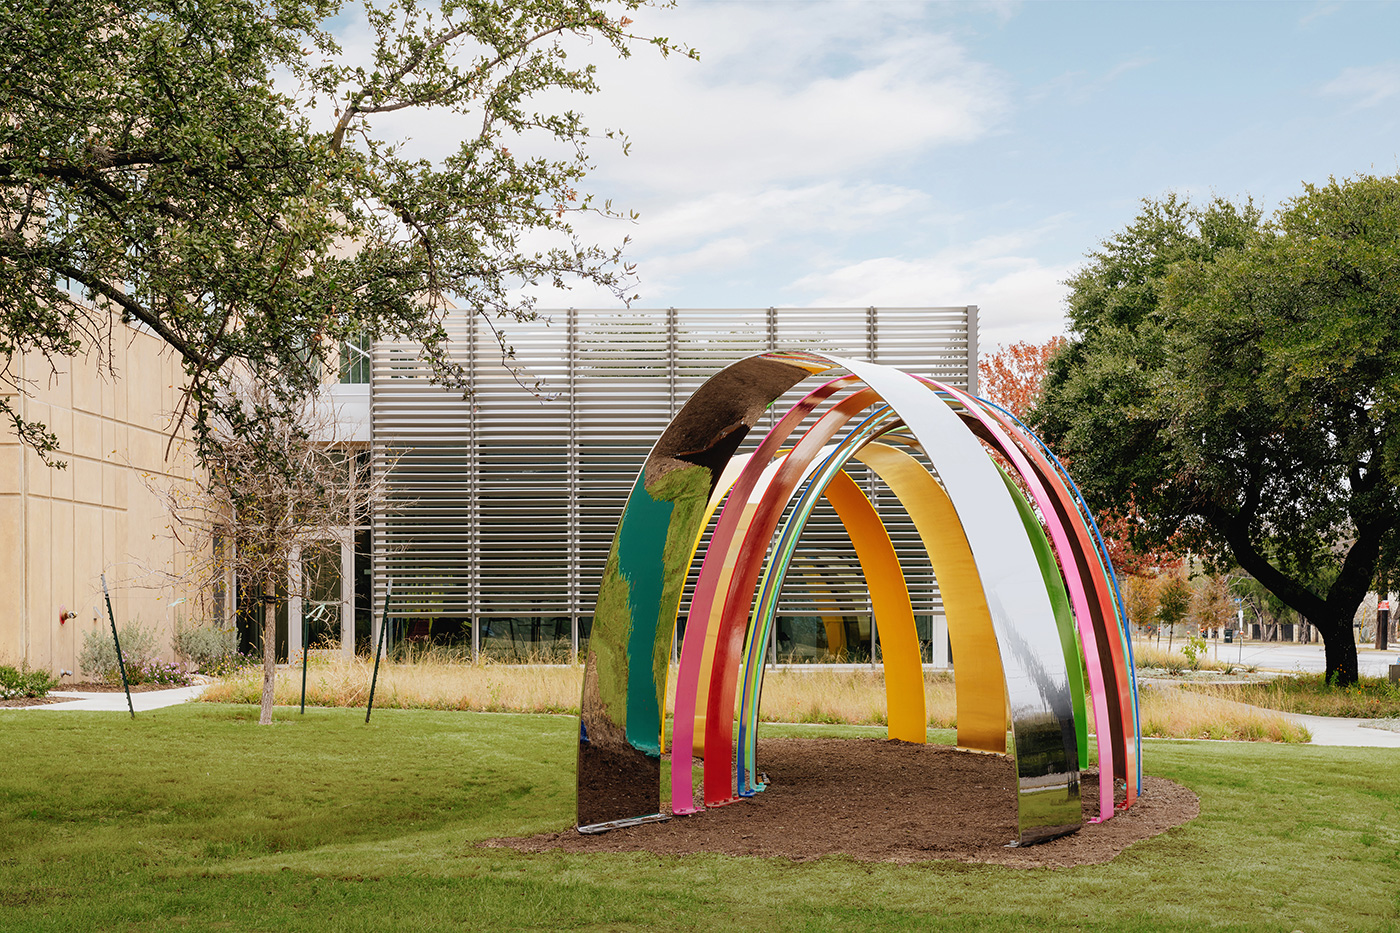 A colorful large sculpture in grass outside of a building.